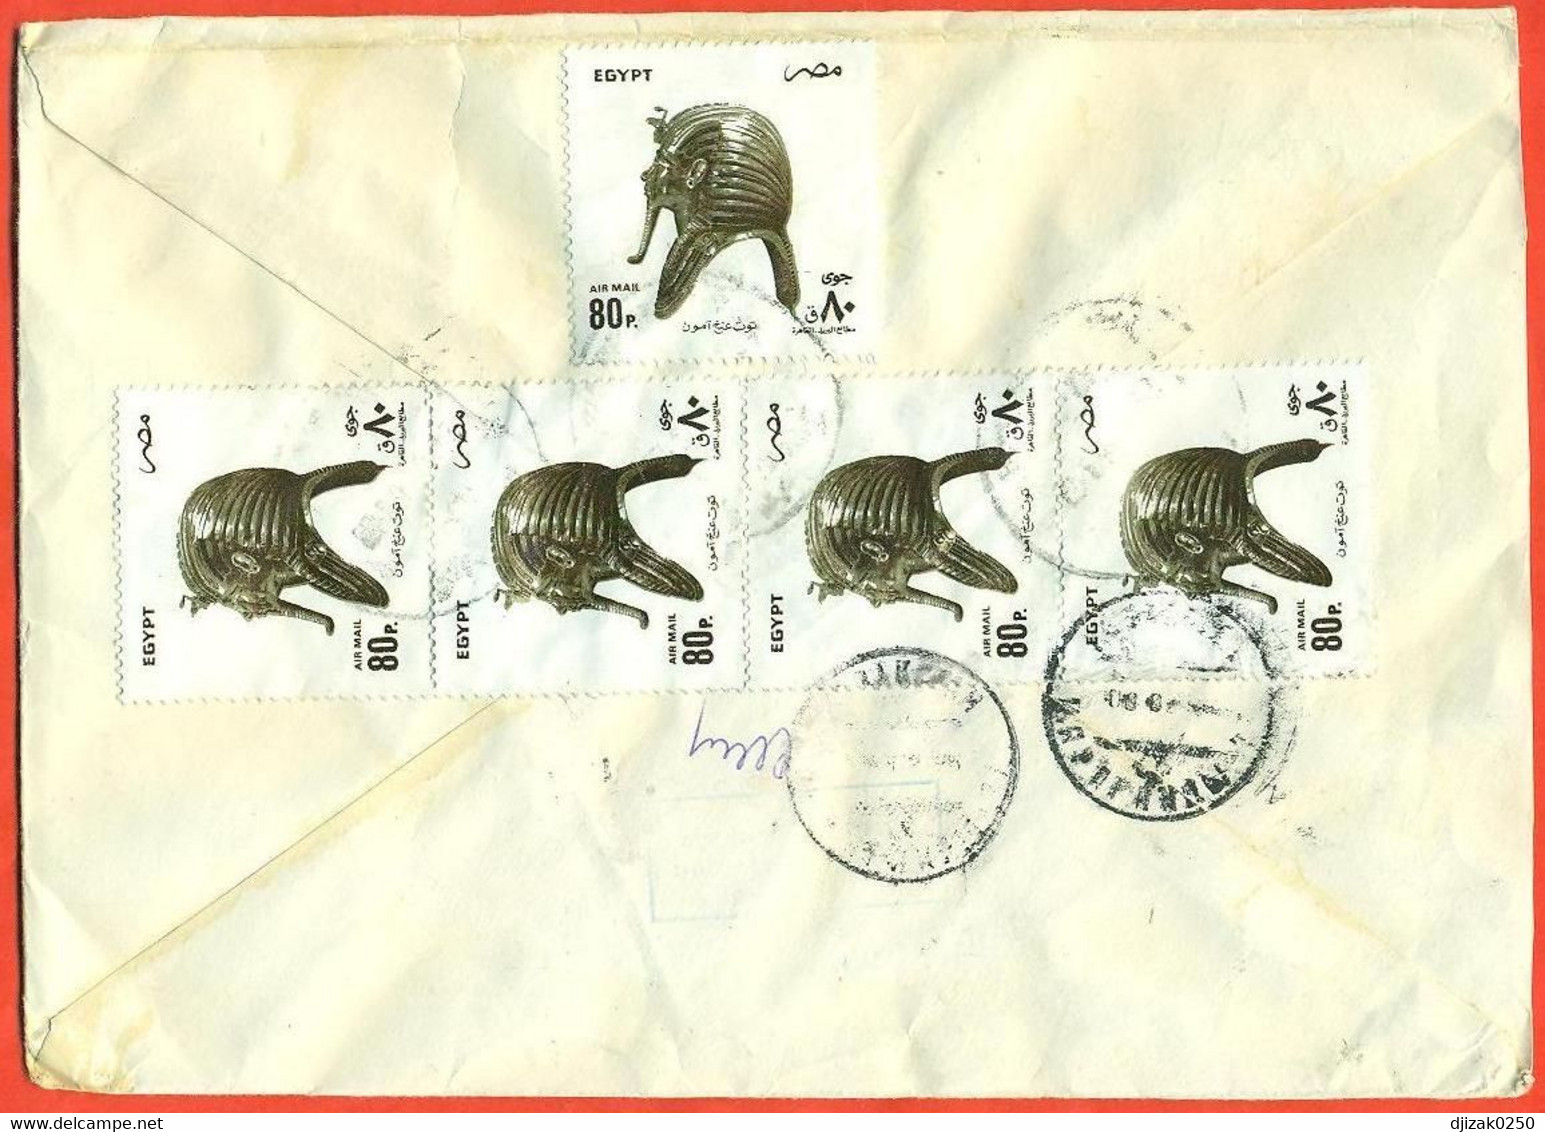 Egypt 1996. Registered Envelope Passed Through The Mail. - Covers & Documents